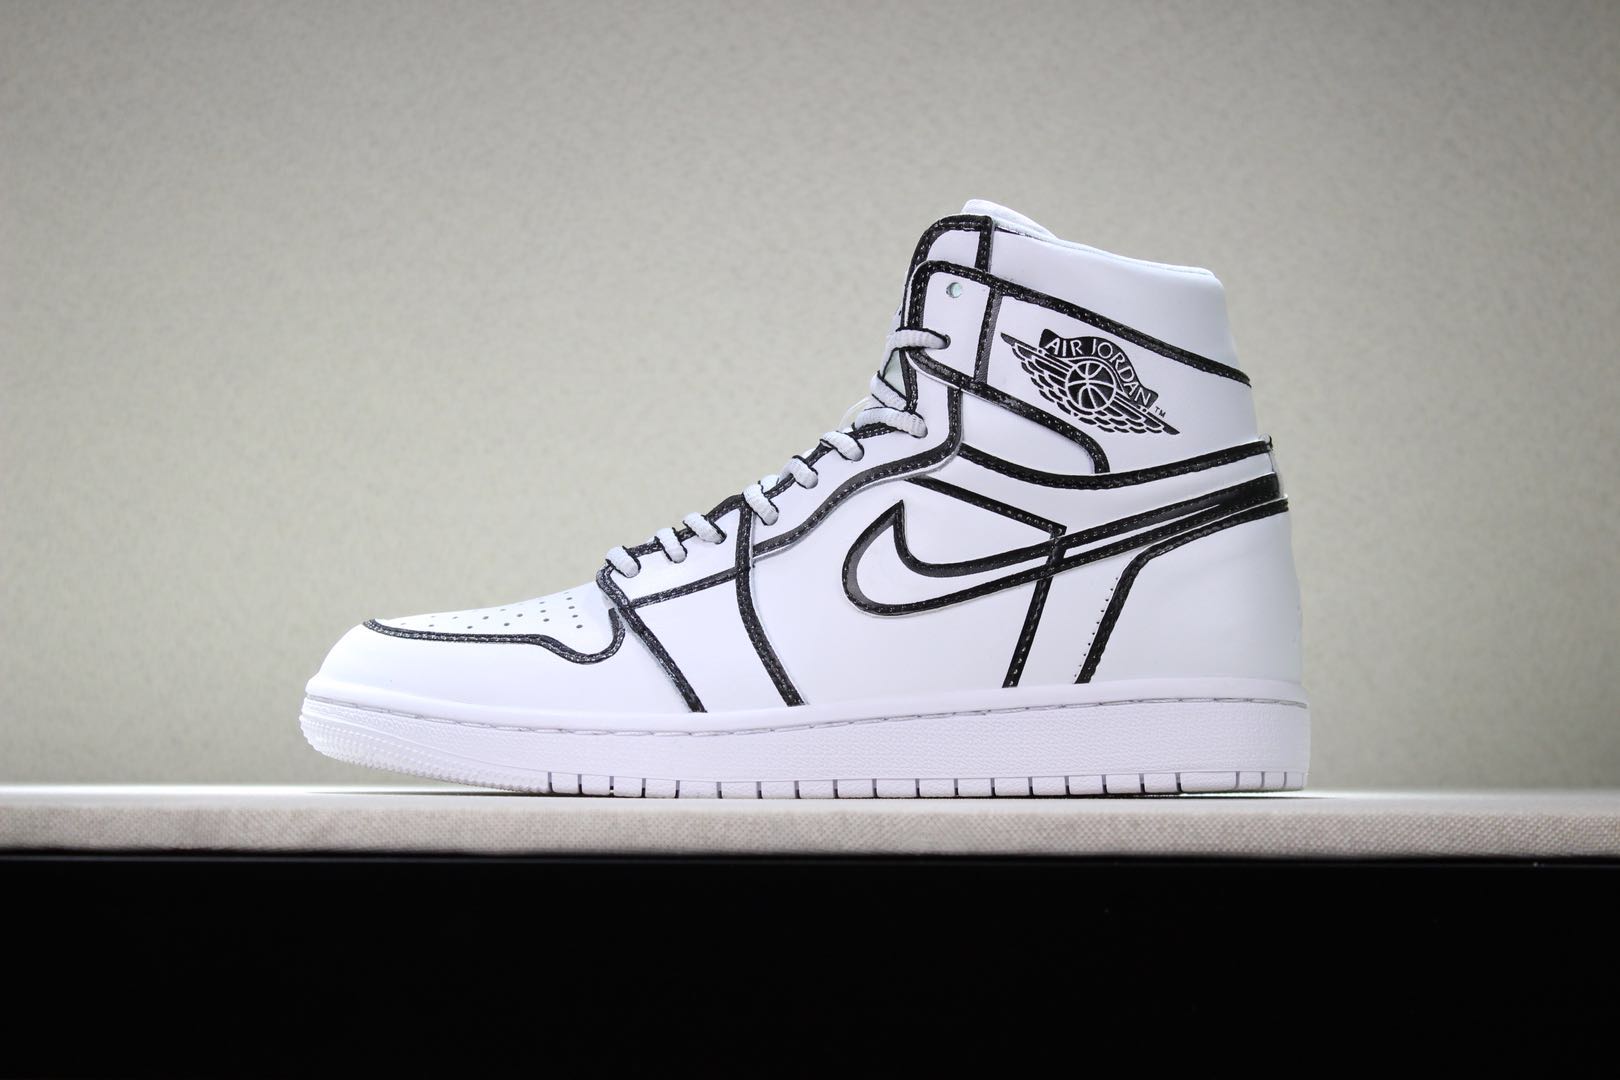 Real Air Jordans 1 Hand Painting White Black Shoes